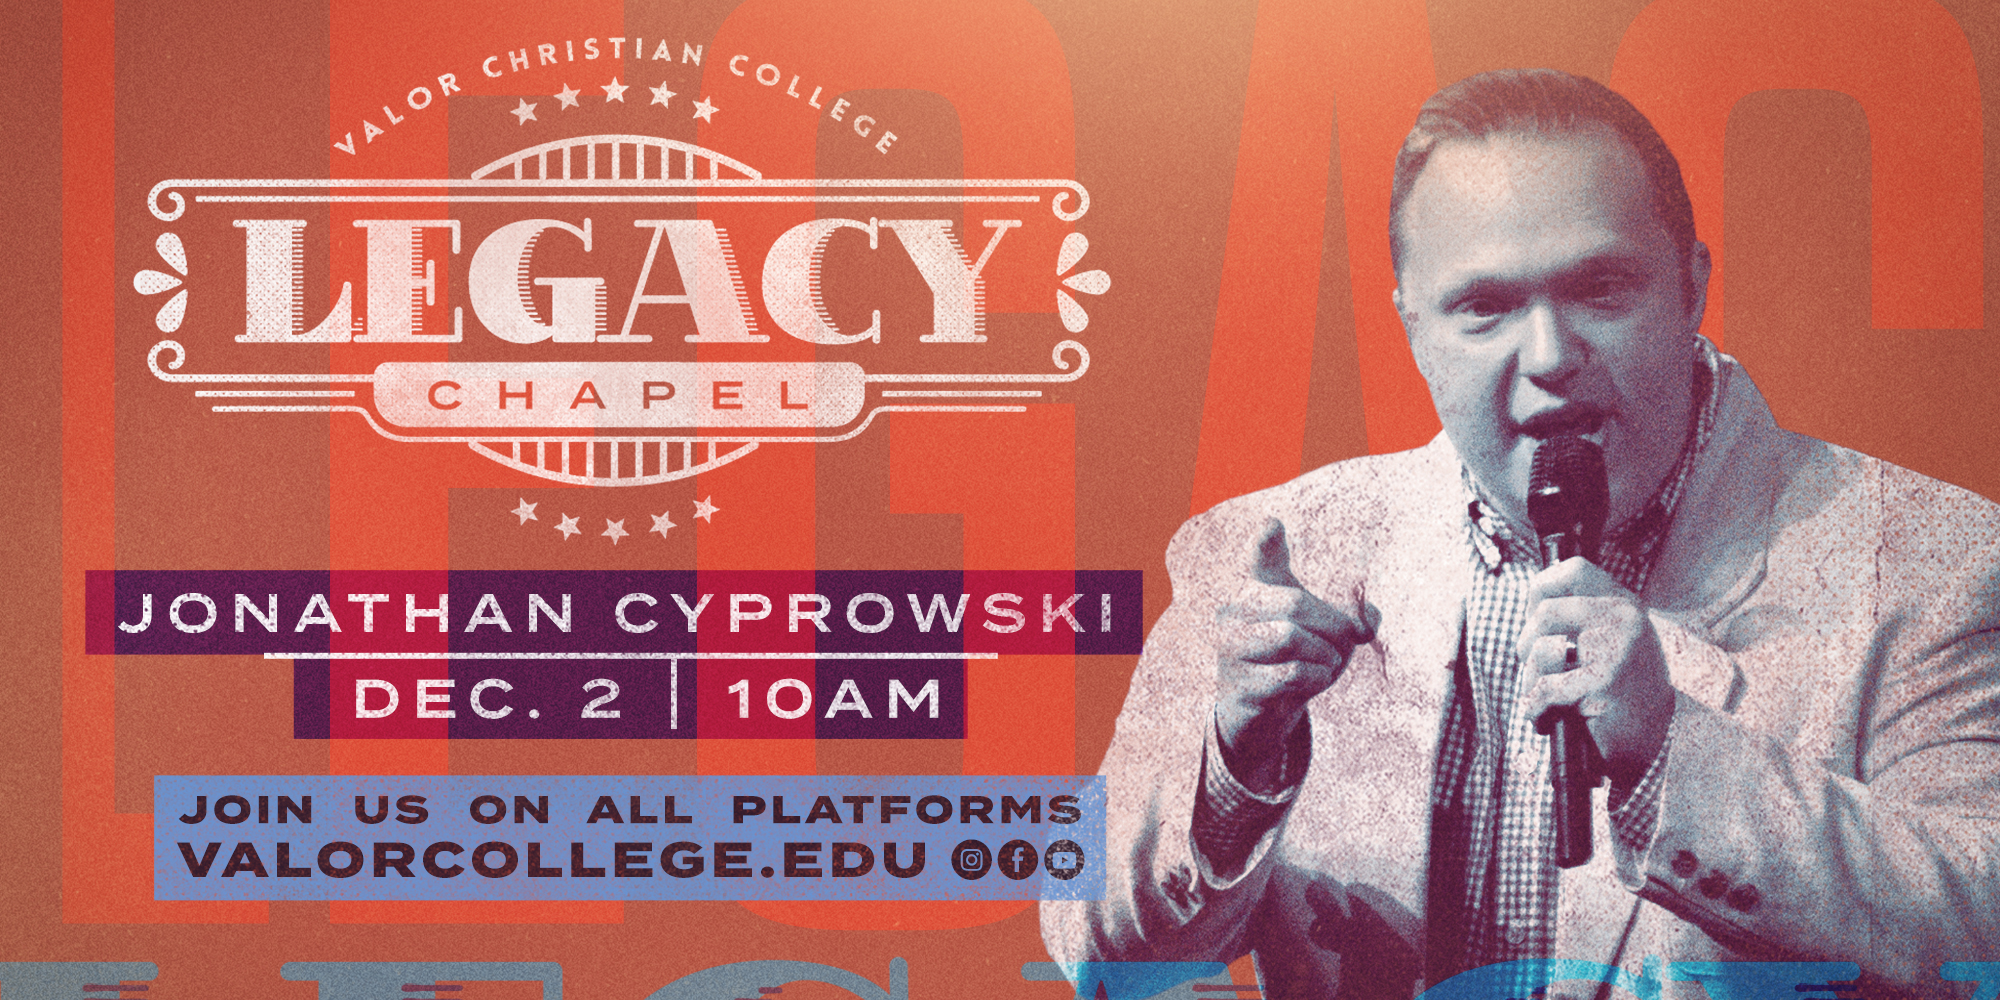 Valor Christian College Legacy Chapel Jonathan Cyprowski December 2nd 10AM Join us on all platforms valorcollege.edu Instagram Facebook Youtube